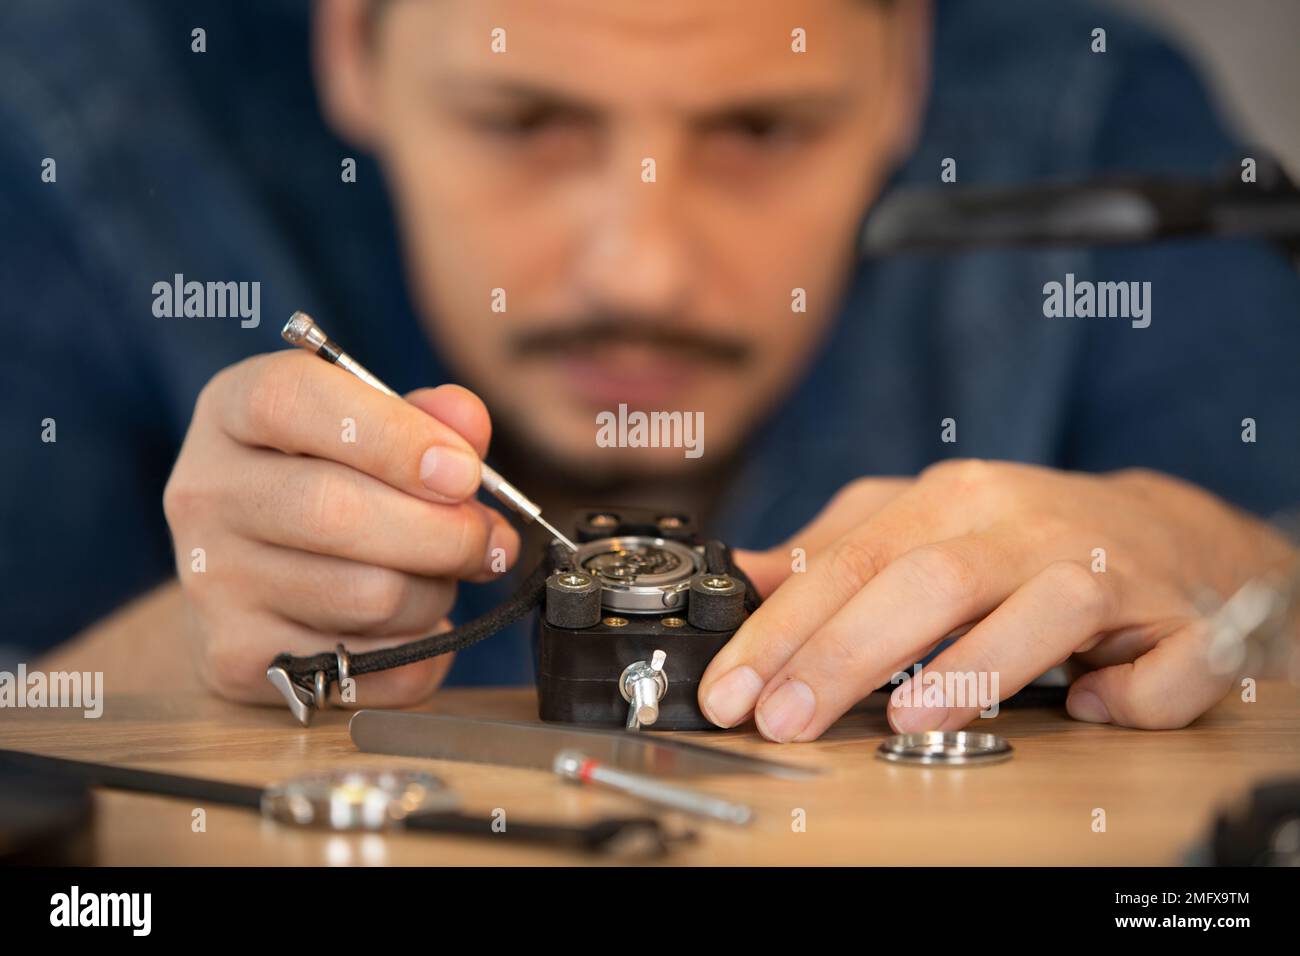 man performing a precision repair on a watch Stock Photo